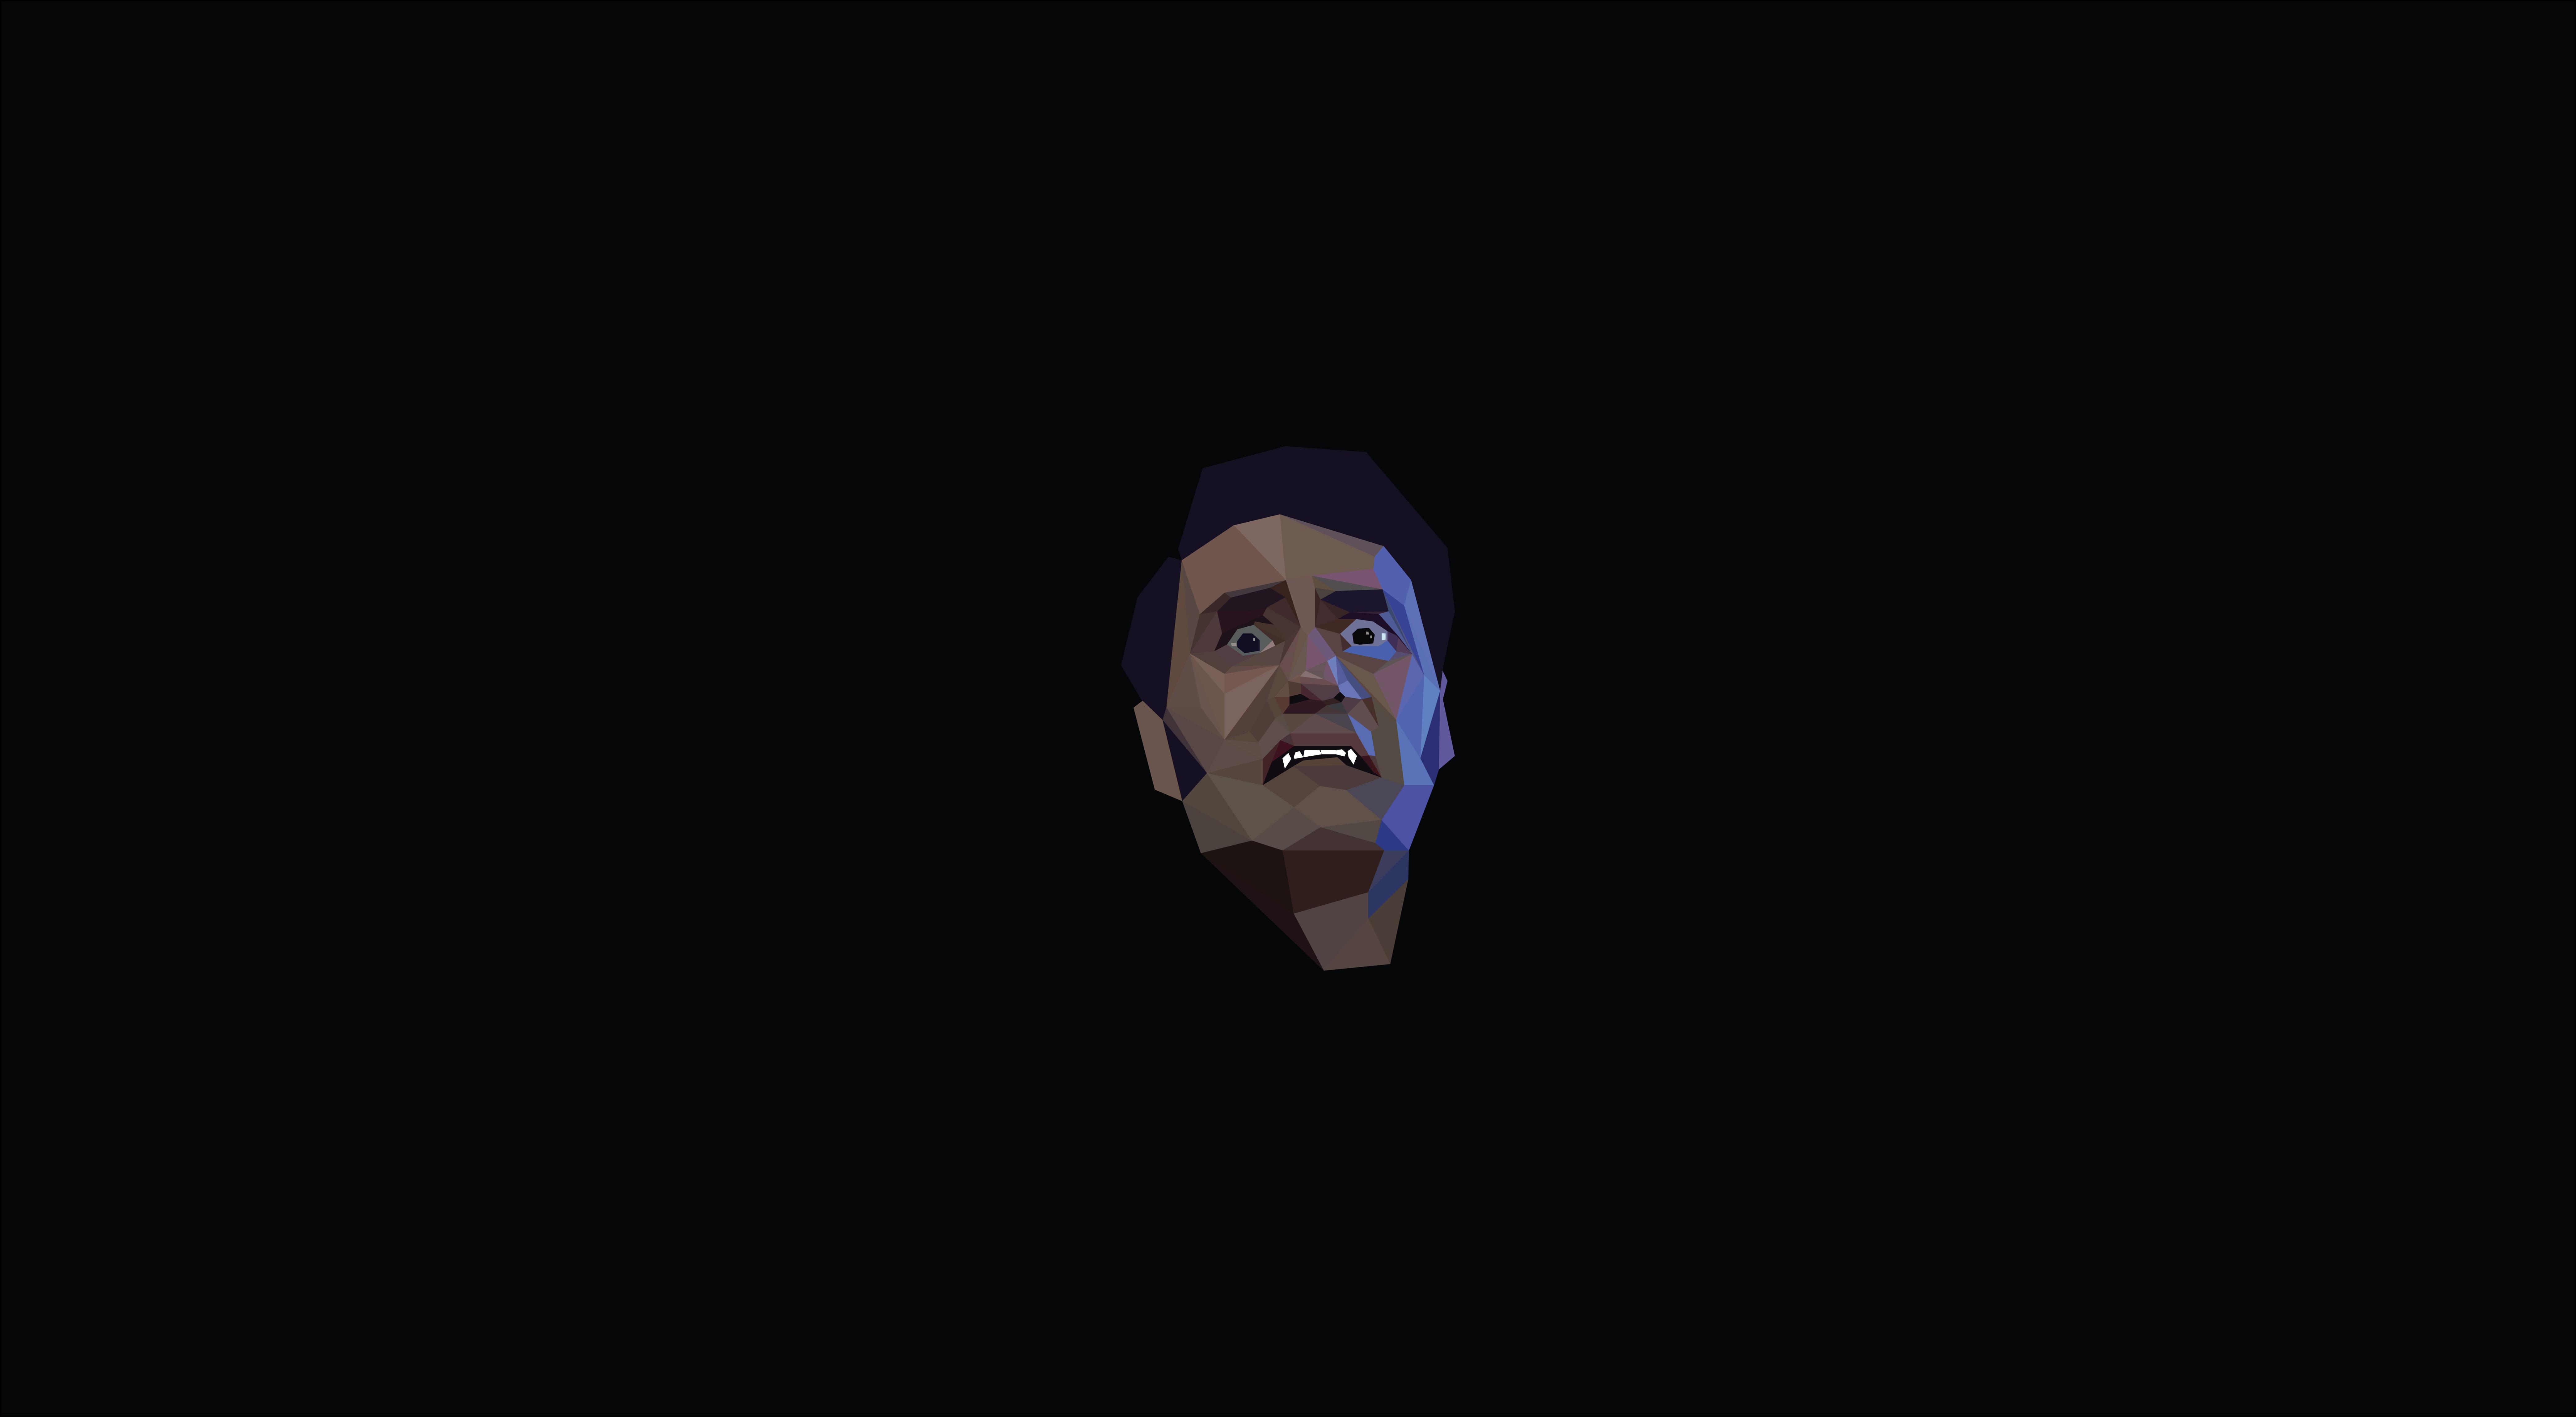 What We Do In The Shadows Low Poly [1920x1080]